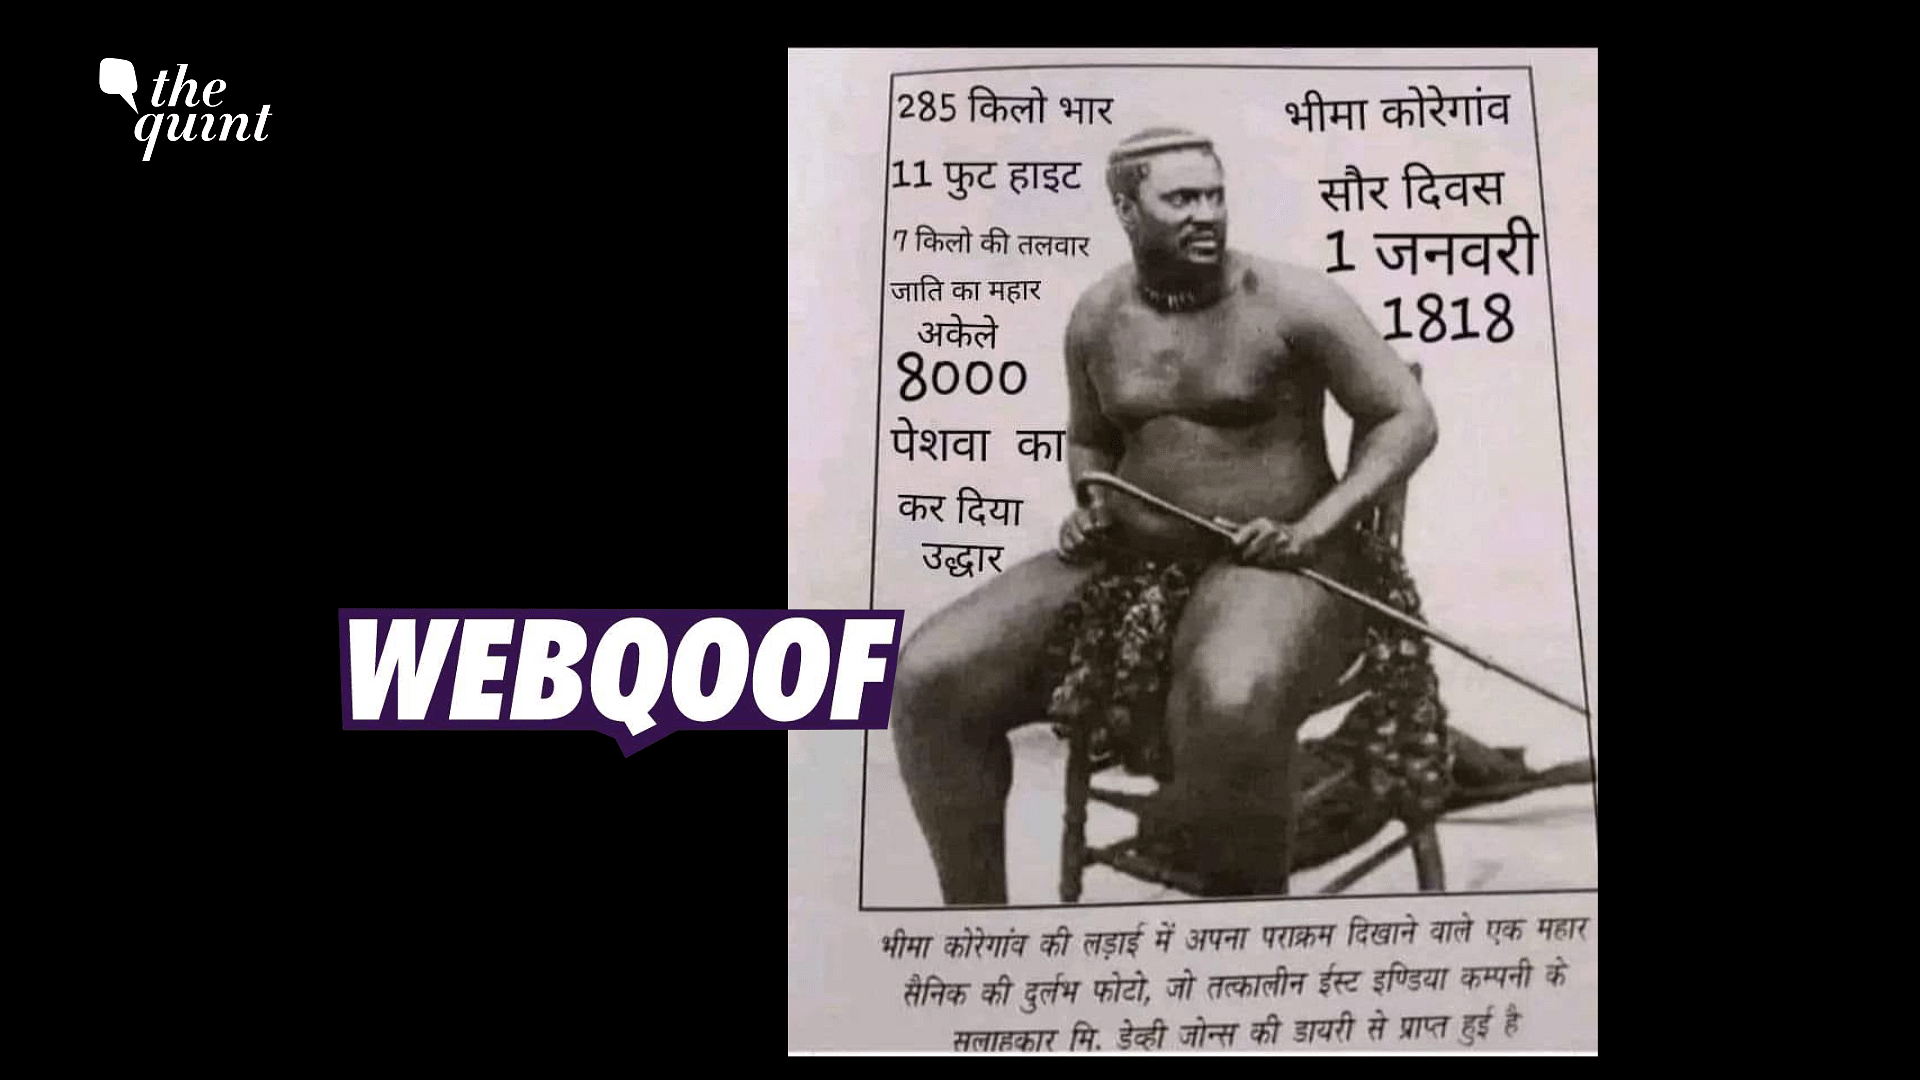 <div class="paragraphs"><p>Fact-check: This image shows a prince of Zulu Kingdom and not a Mahar soldier who fought in Bhima-Koregaon battle.</p></div>